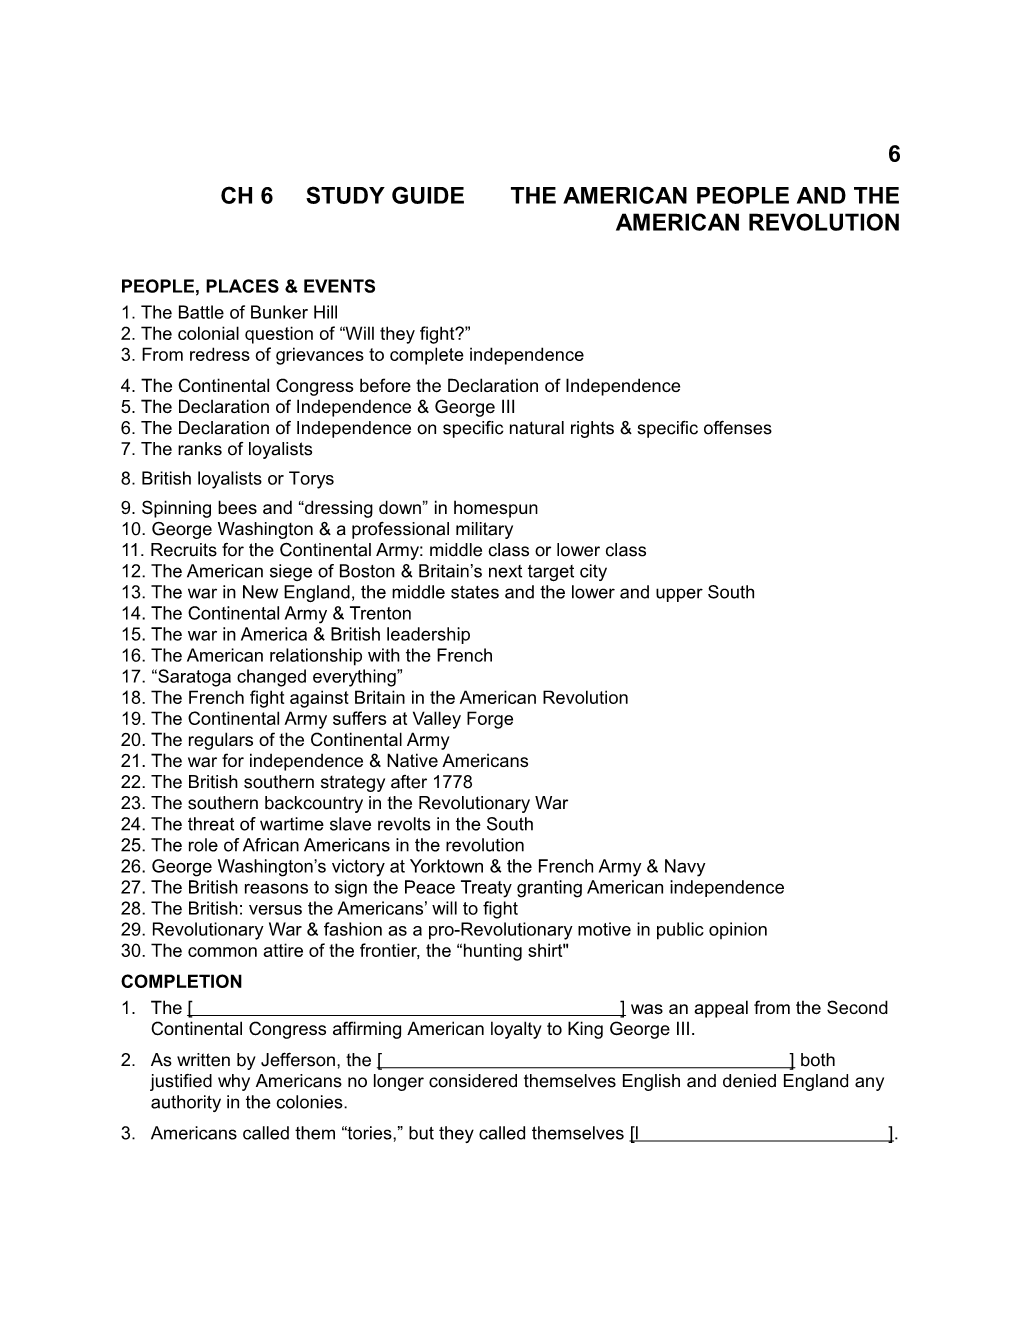 Chapter 6: the American People and the American Revolution